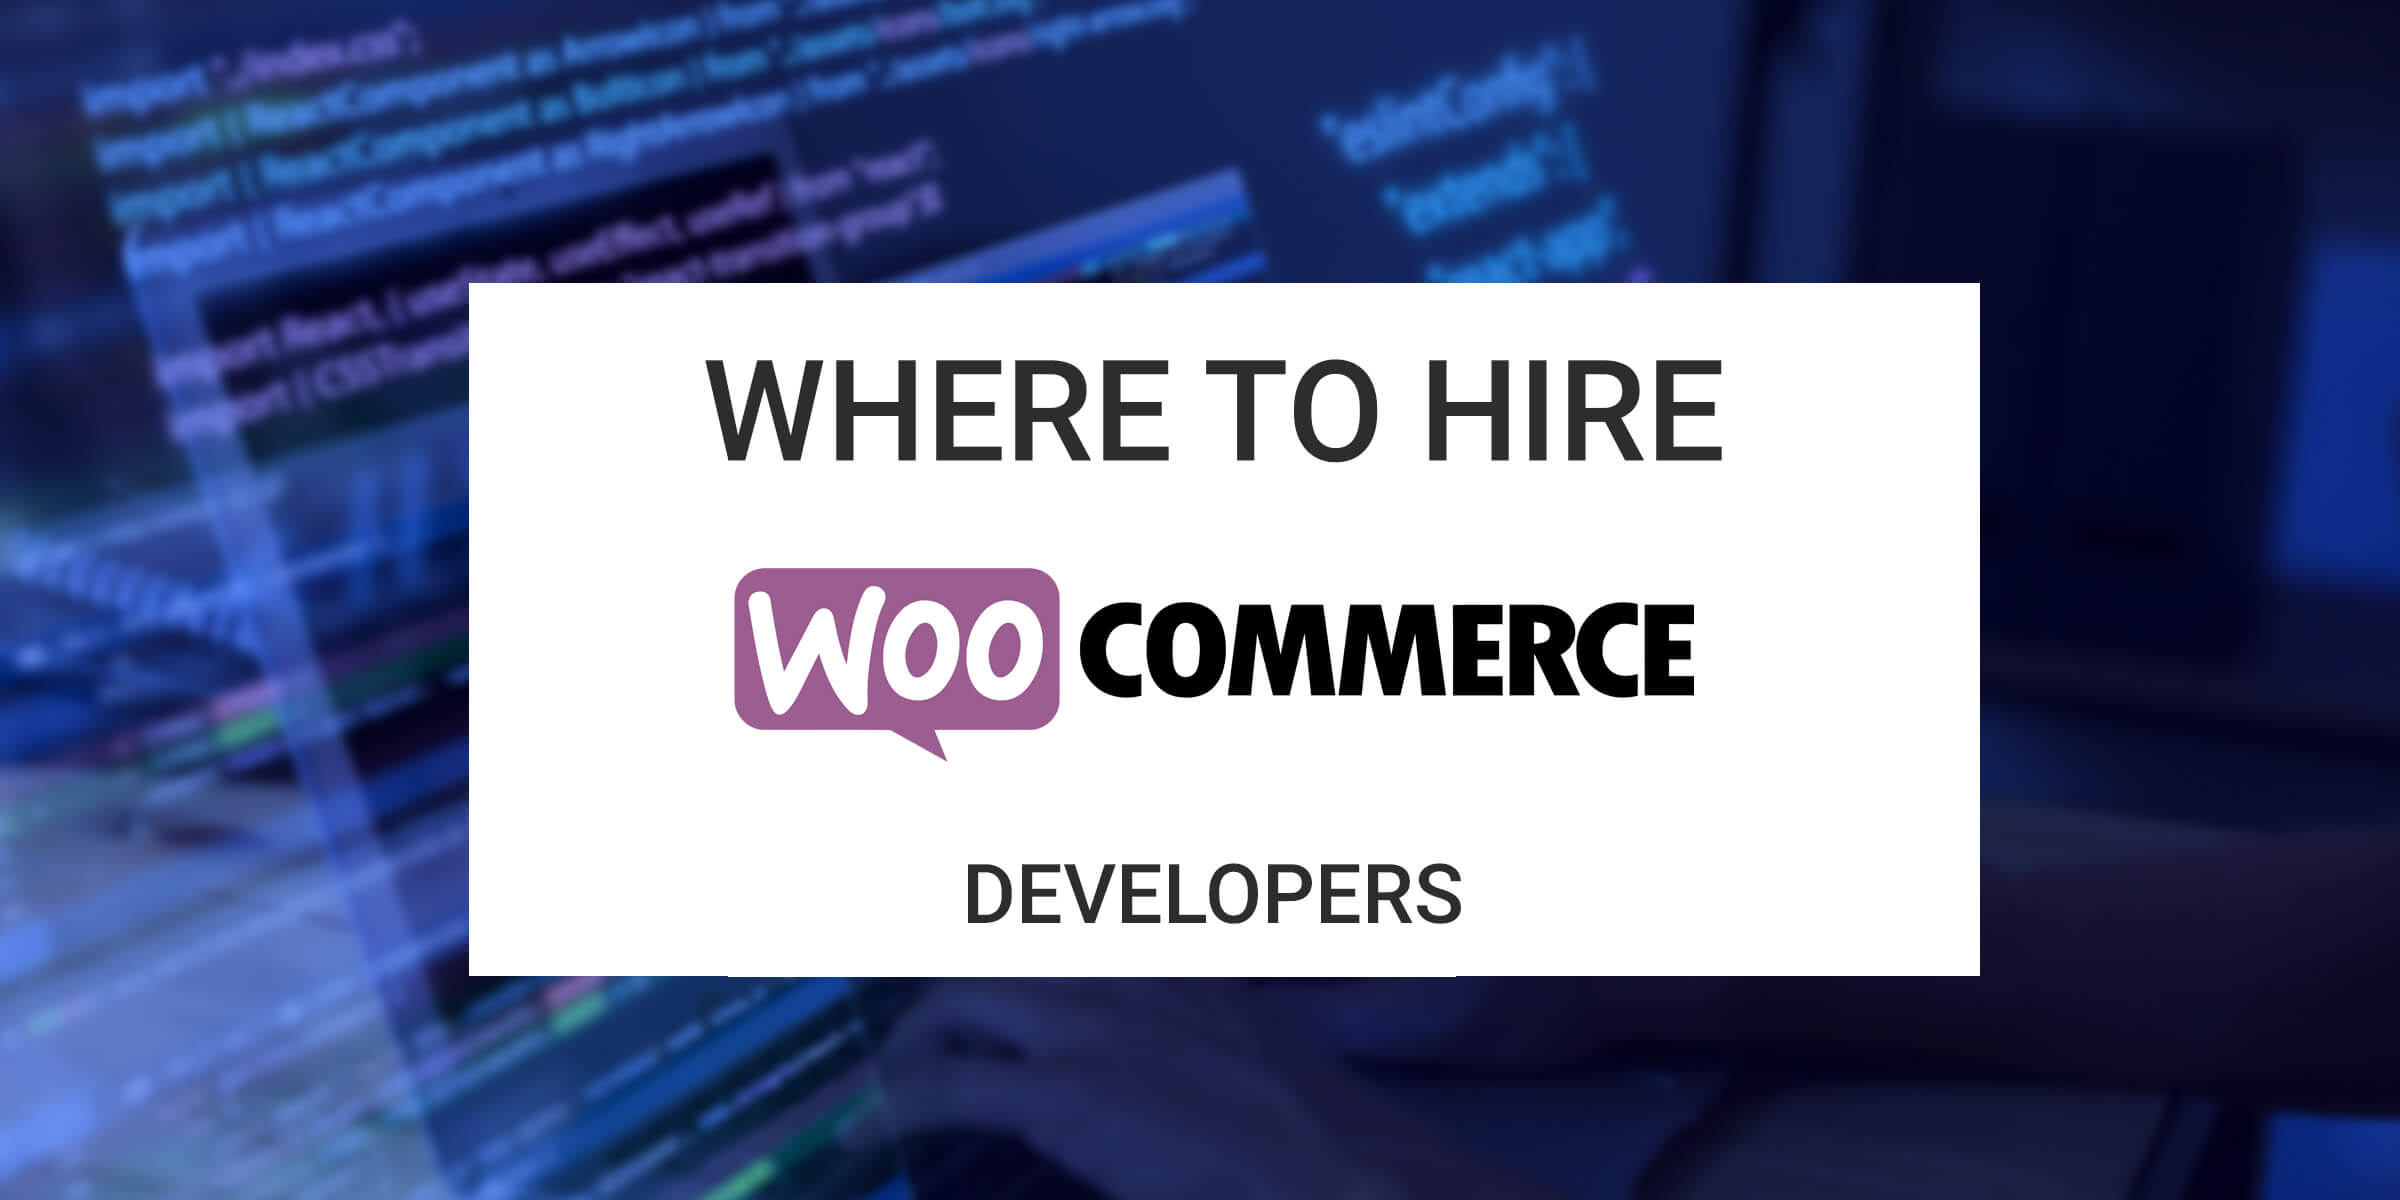 Where to Hire WooCommerce Developers